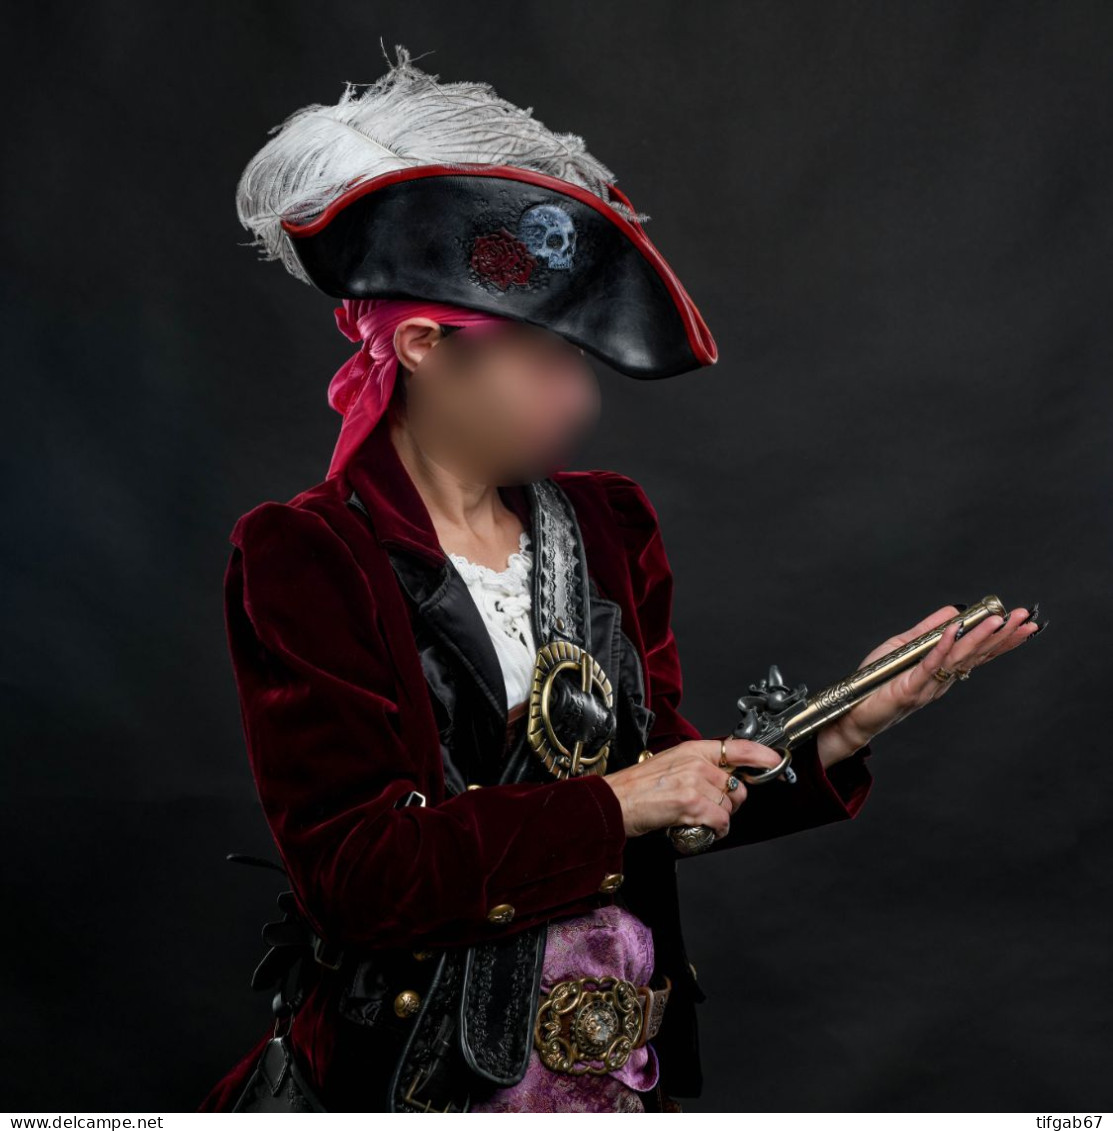 Costume Pirate Complet Femme Professionnel - Theatre, Fancy Dresses & Costumes